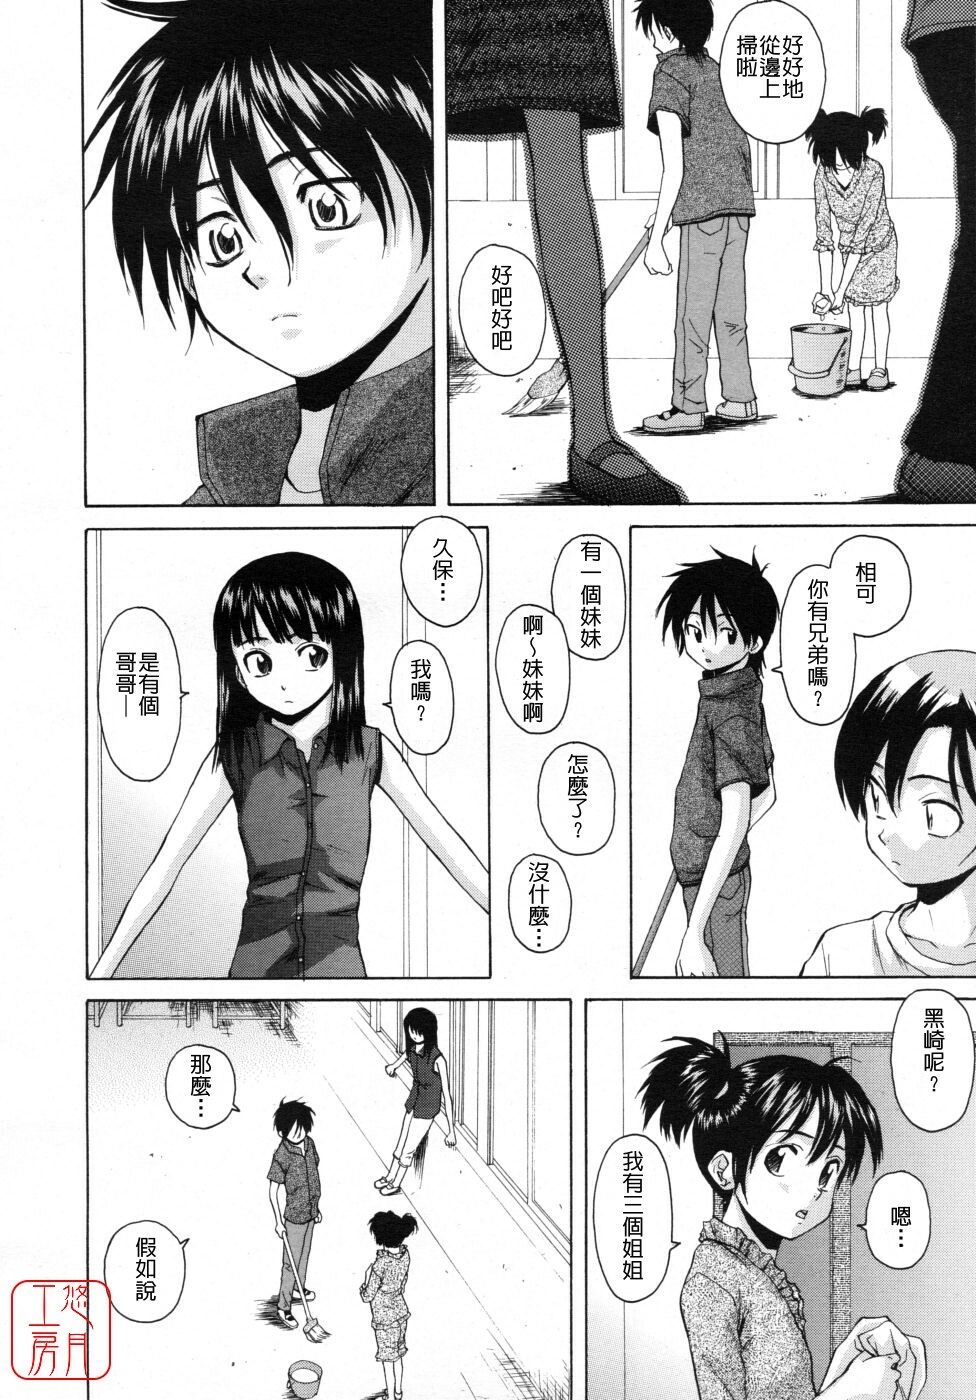 [Fuuga] Girl Friend 2 (Chinese) page 2 full